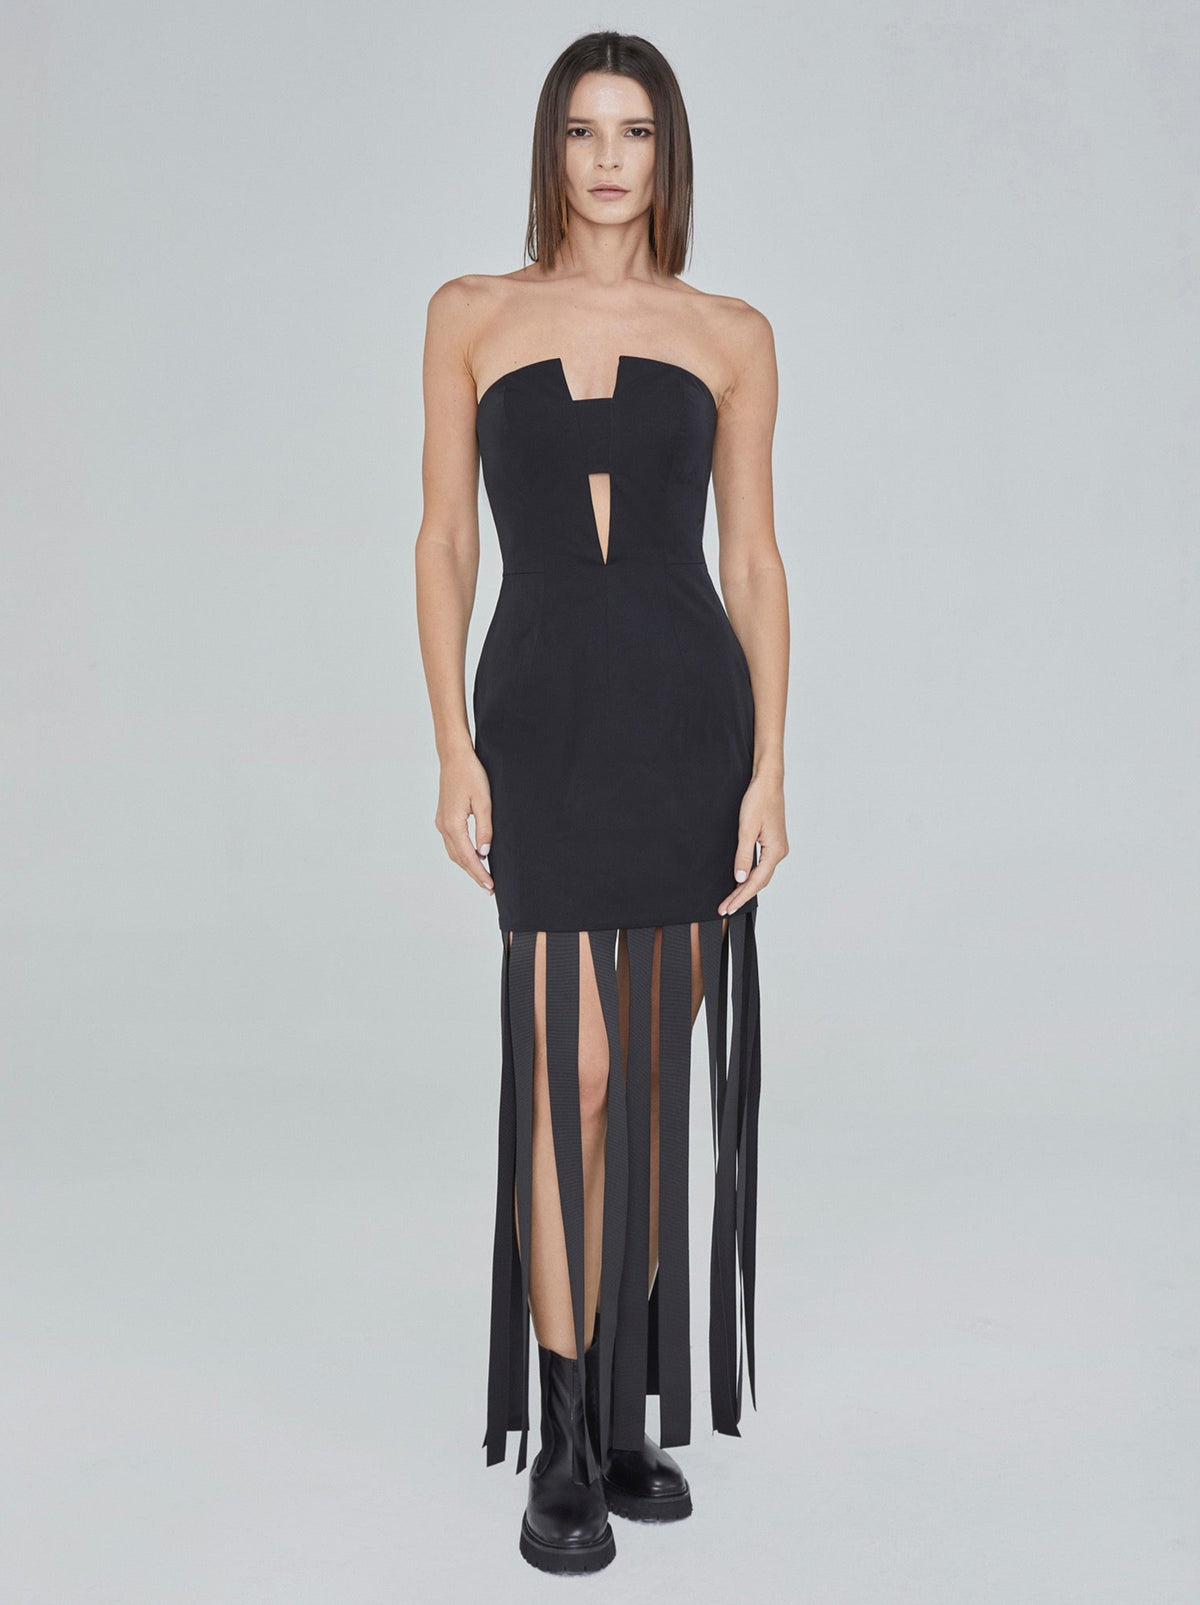 A-JANE Gemma Tube Fitted Strap Dress